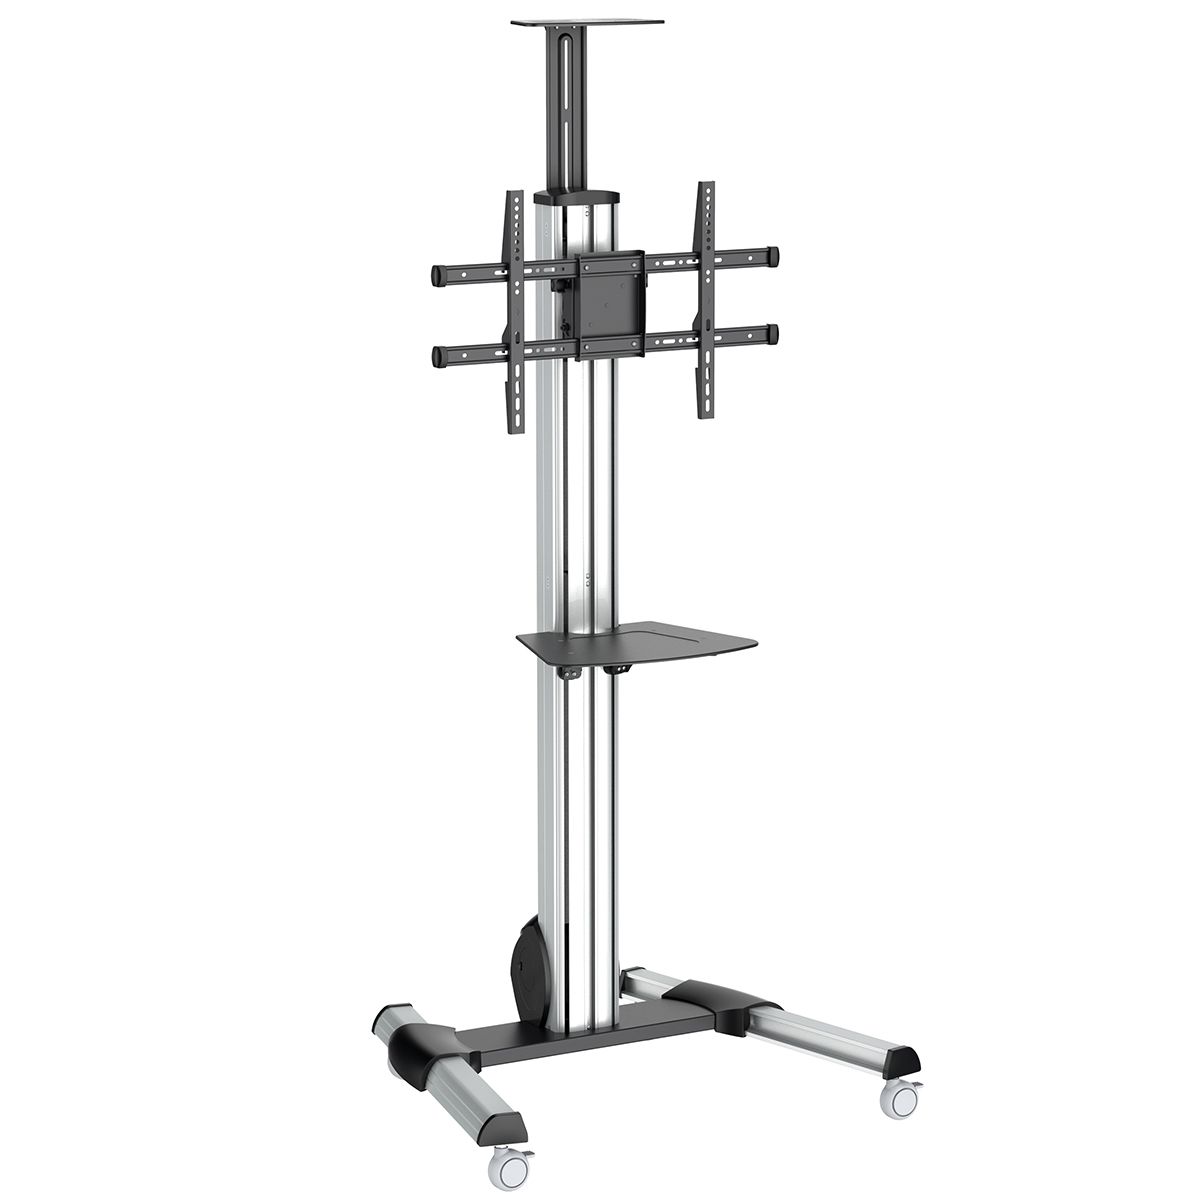 StarTech.com Floor Mounting Portable TV Stand for 1 x Screen, 75in Screen Size